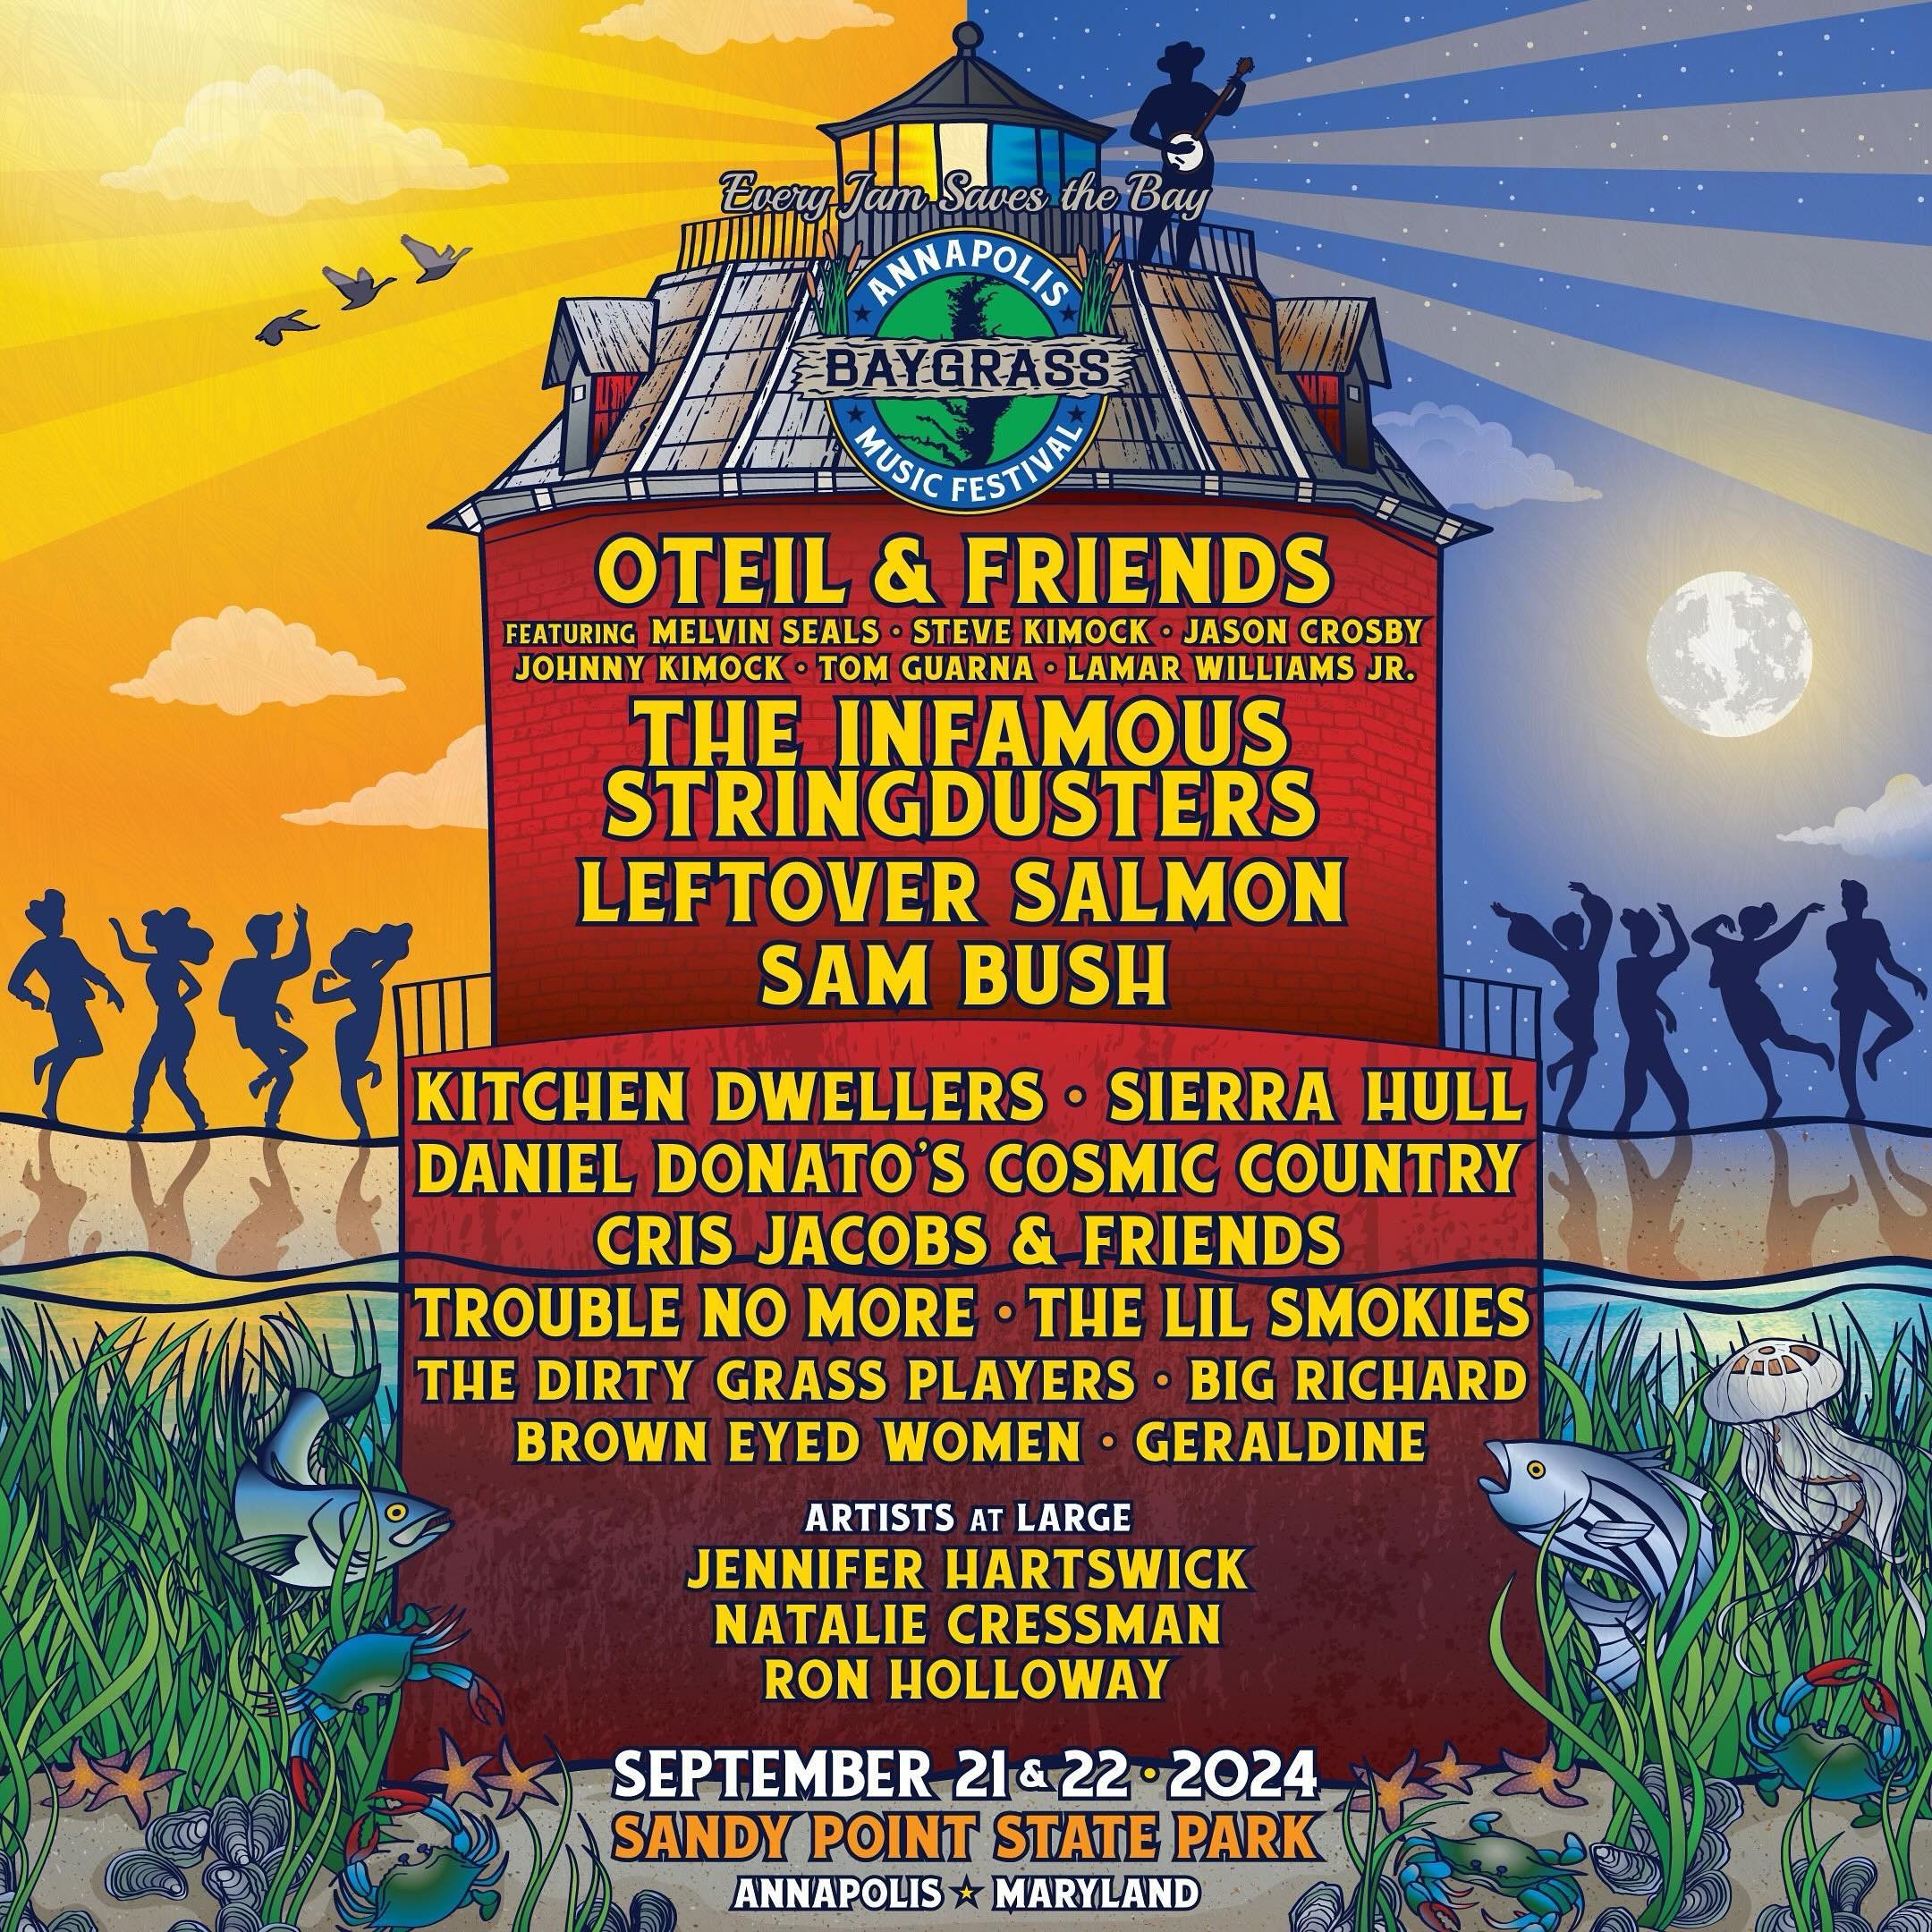 🚨 @annapolisbaygrassfestival❗It&rsquo;s an honor to join the lineup this year! Catch ya in Maryland this September at Sandy Point State Park 🦀 Tickets go on sale tomorrow 4/11. 

🎟️ &rarr; Link in bio / story